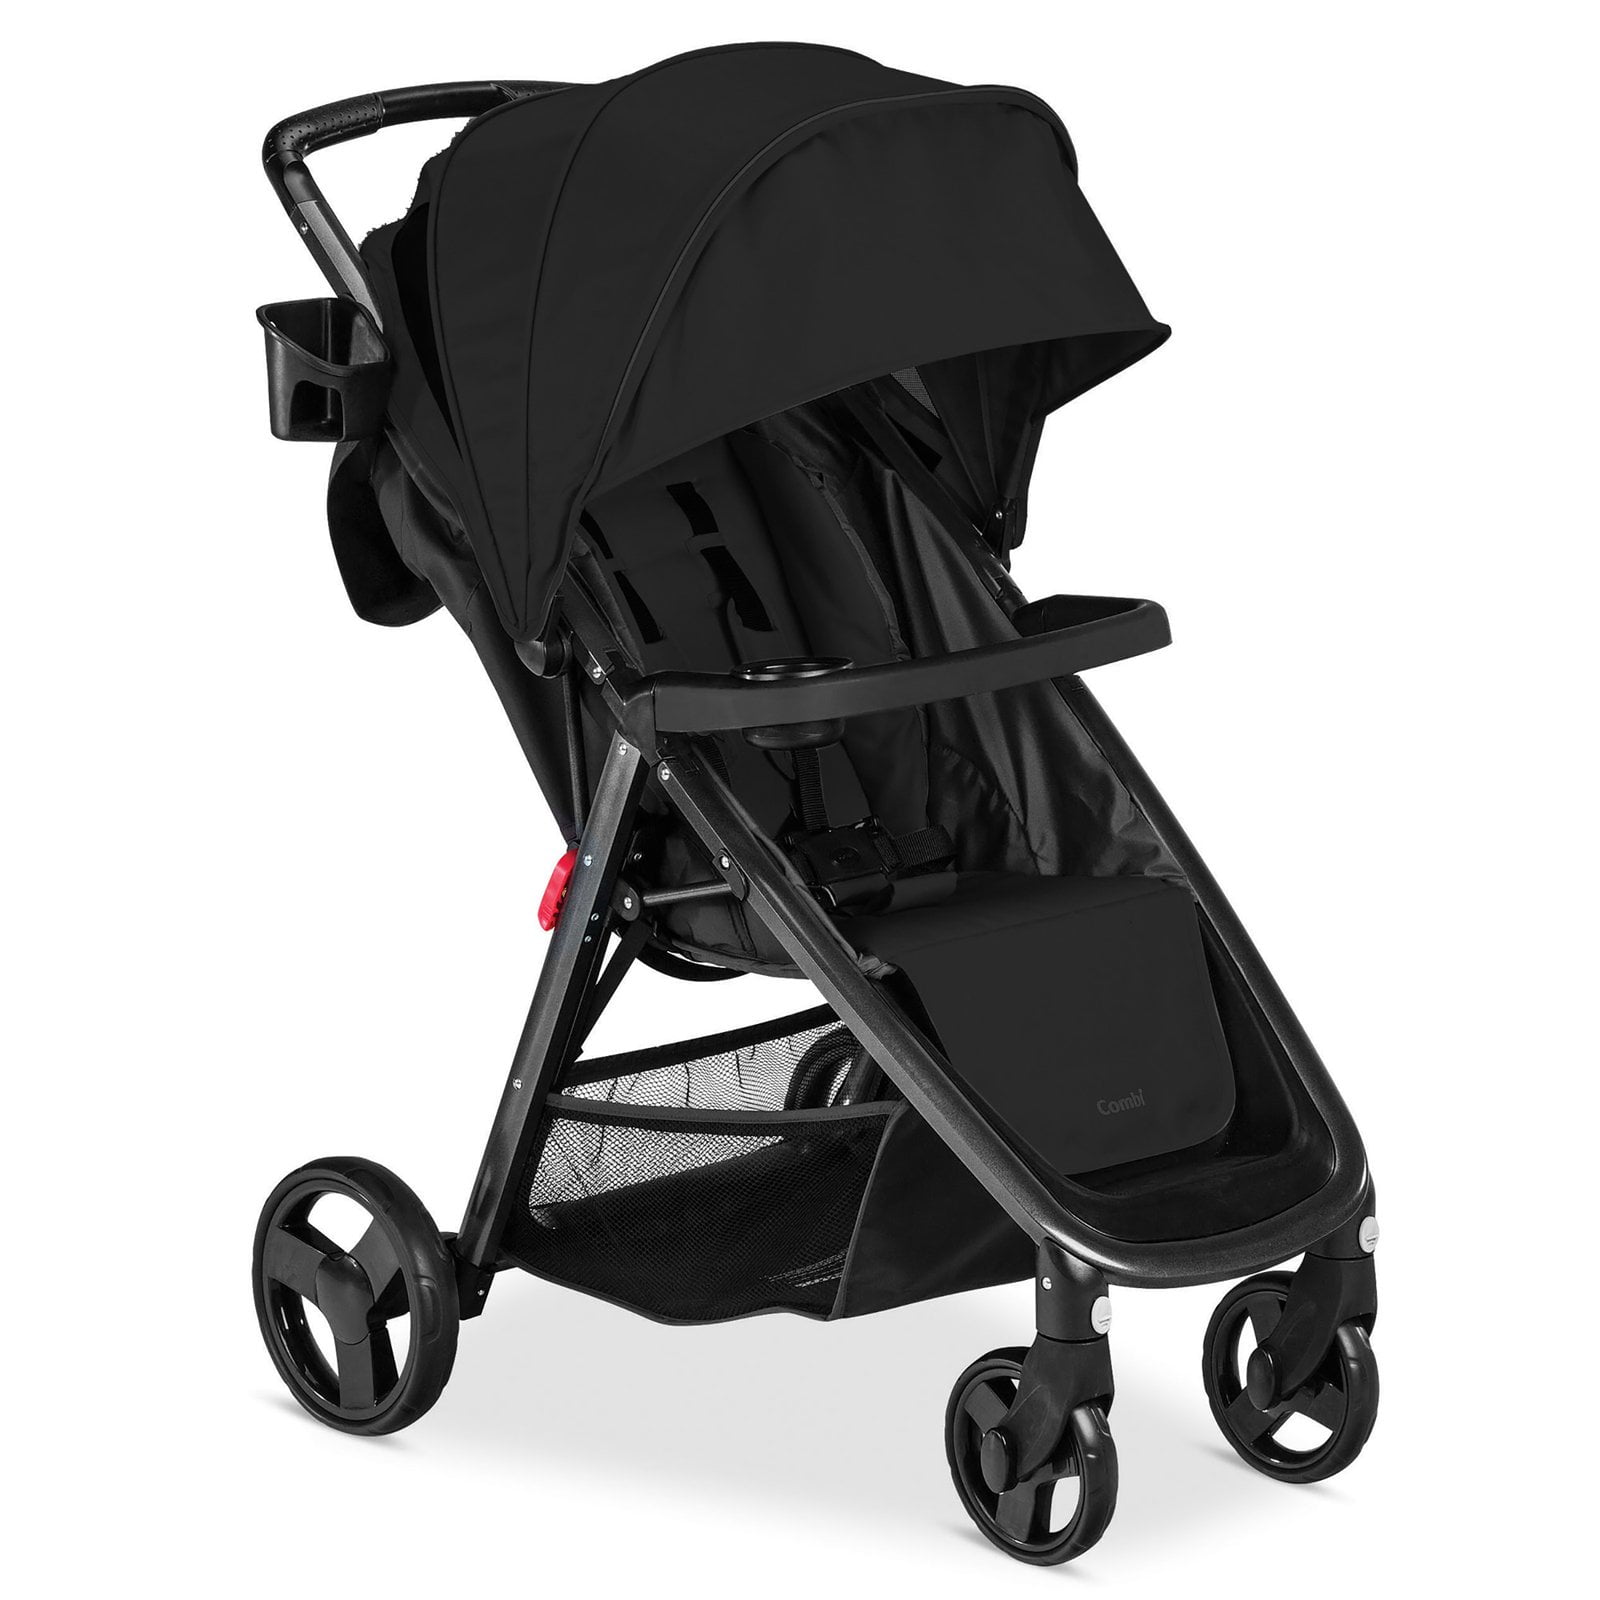 Free Shipping!! Combi 2016 Fold N Go Double Stroller in Salsa Brand New! 